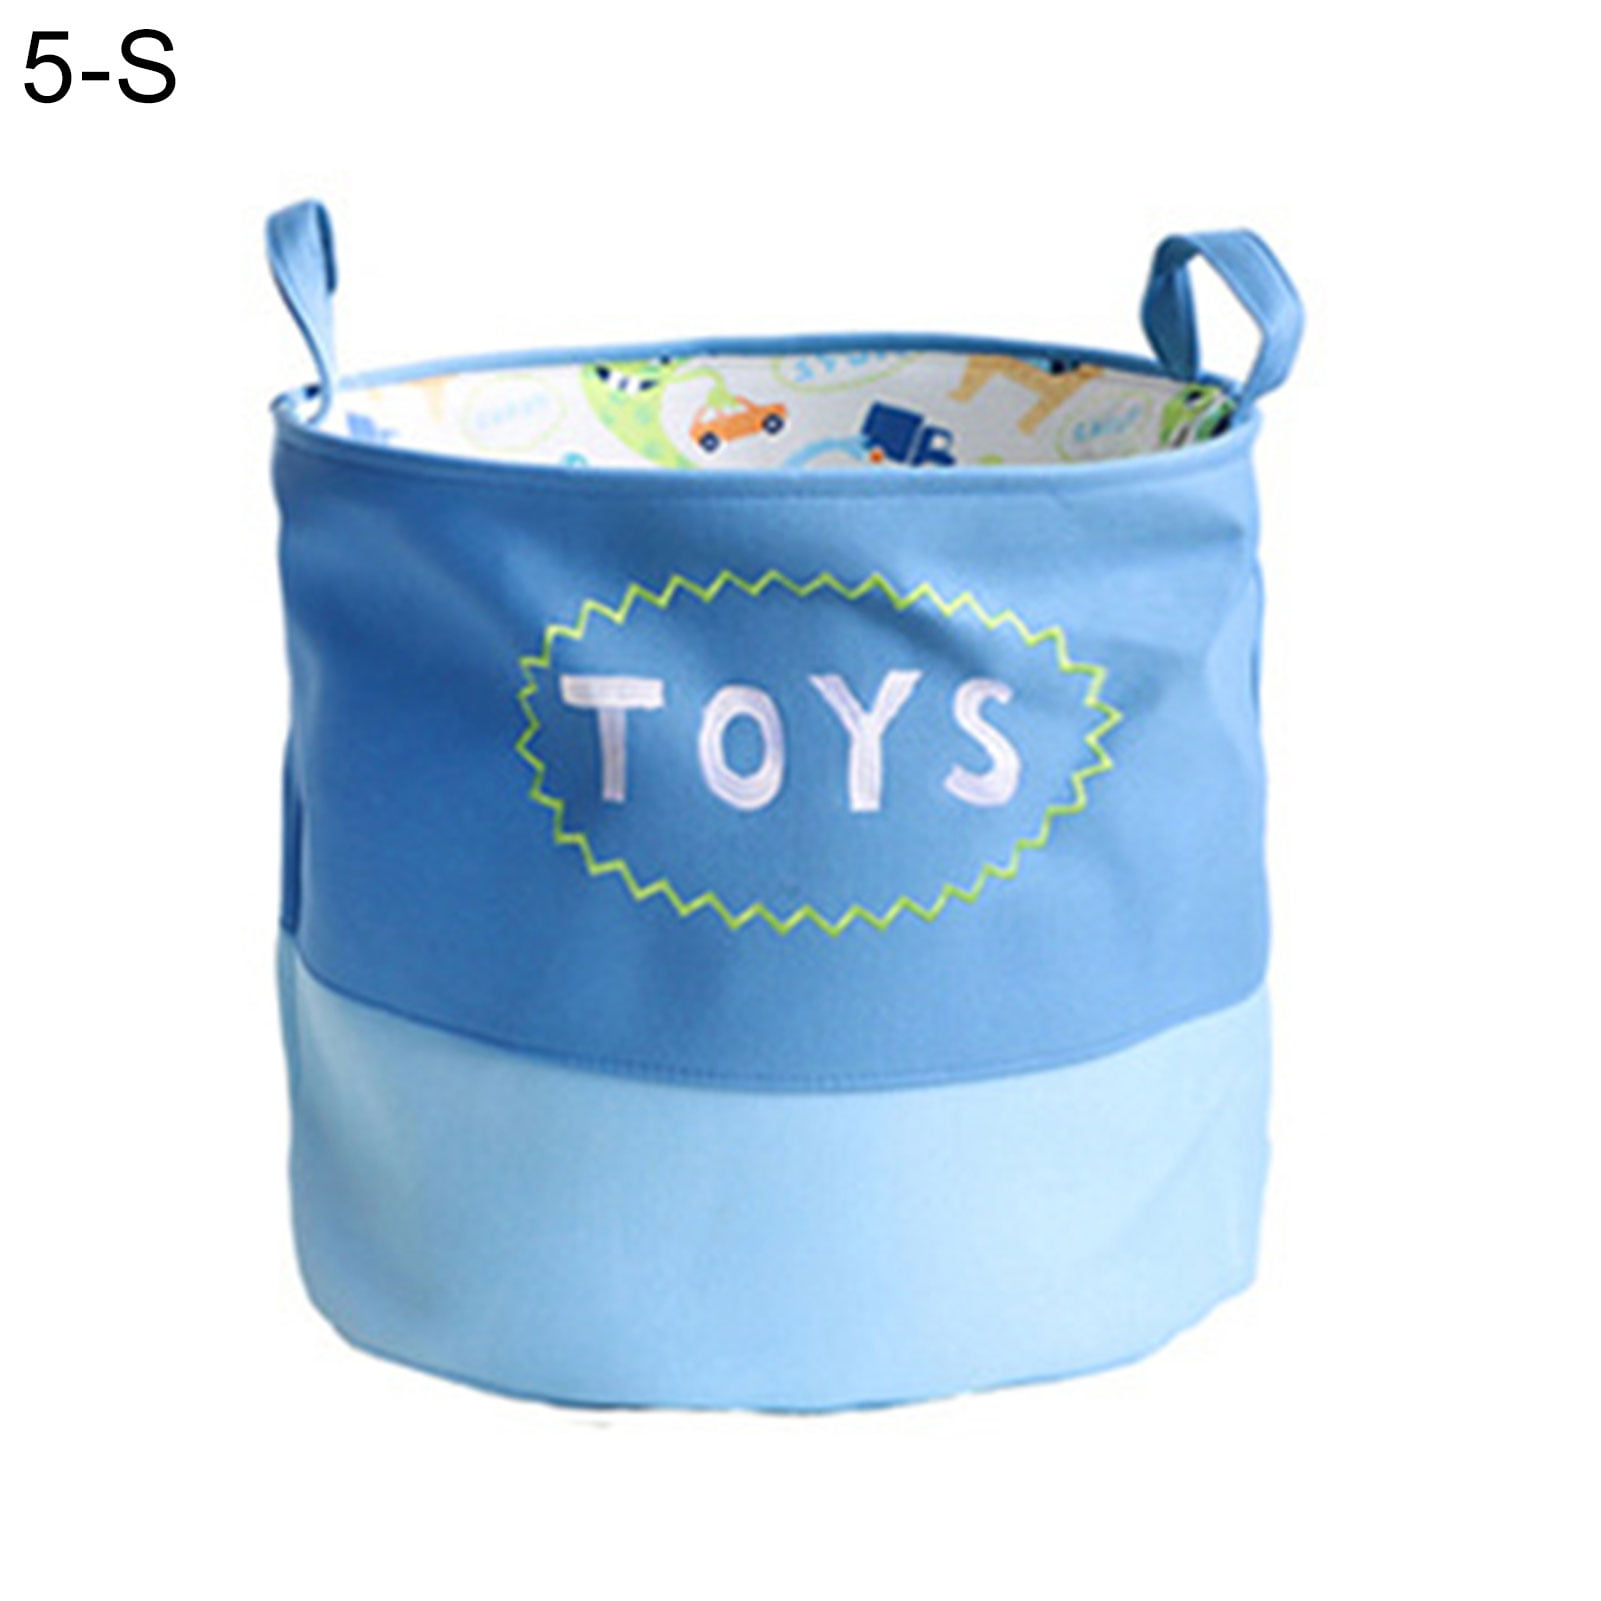 Details about   Extra large jumbo LAUNDRY shopping bags children's toy storage reusable bags 